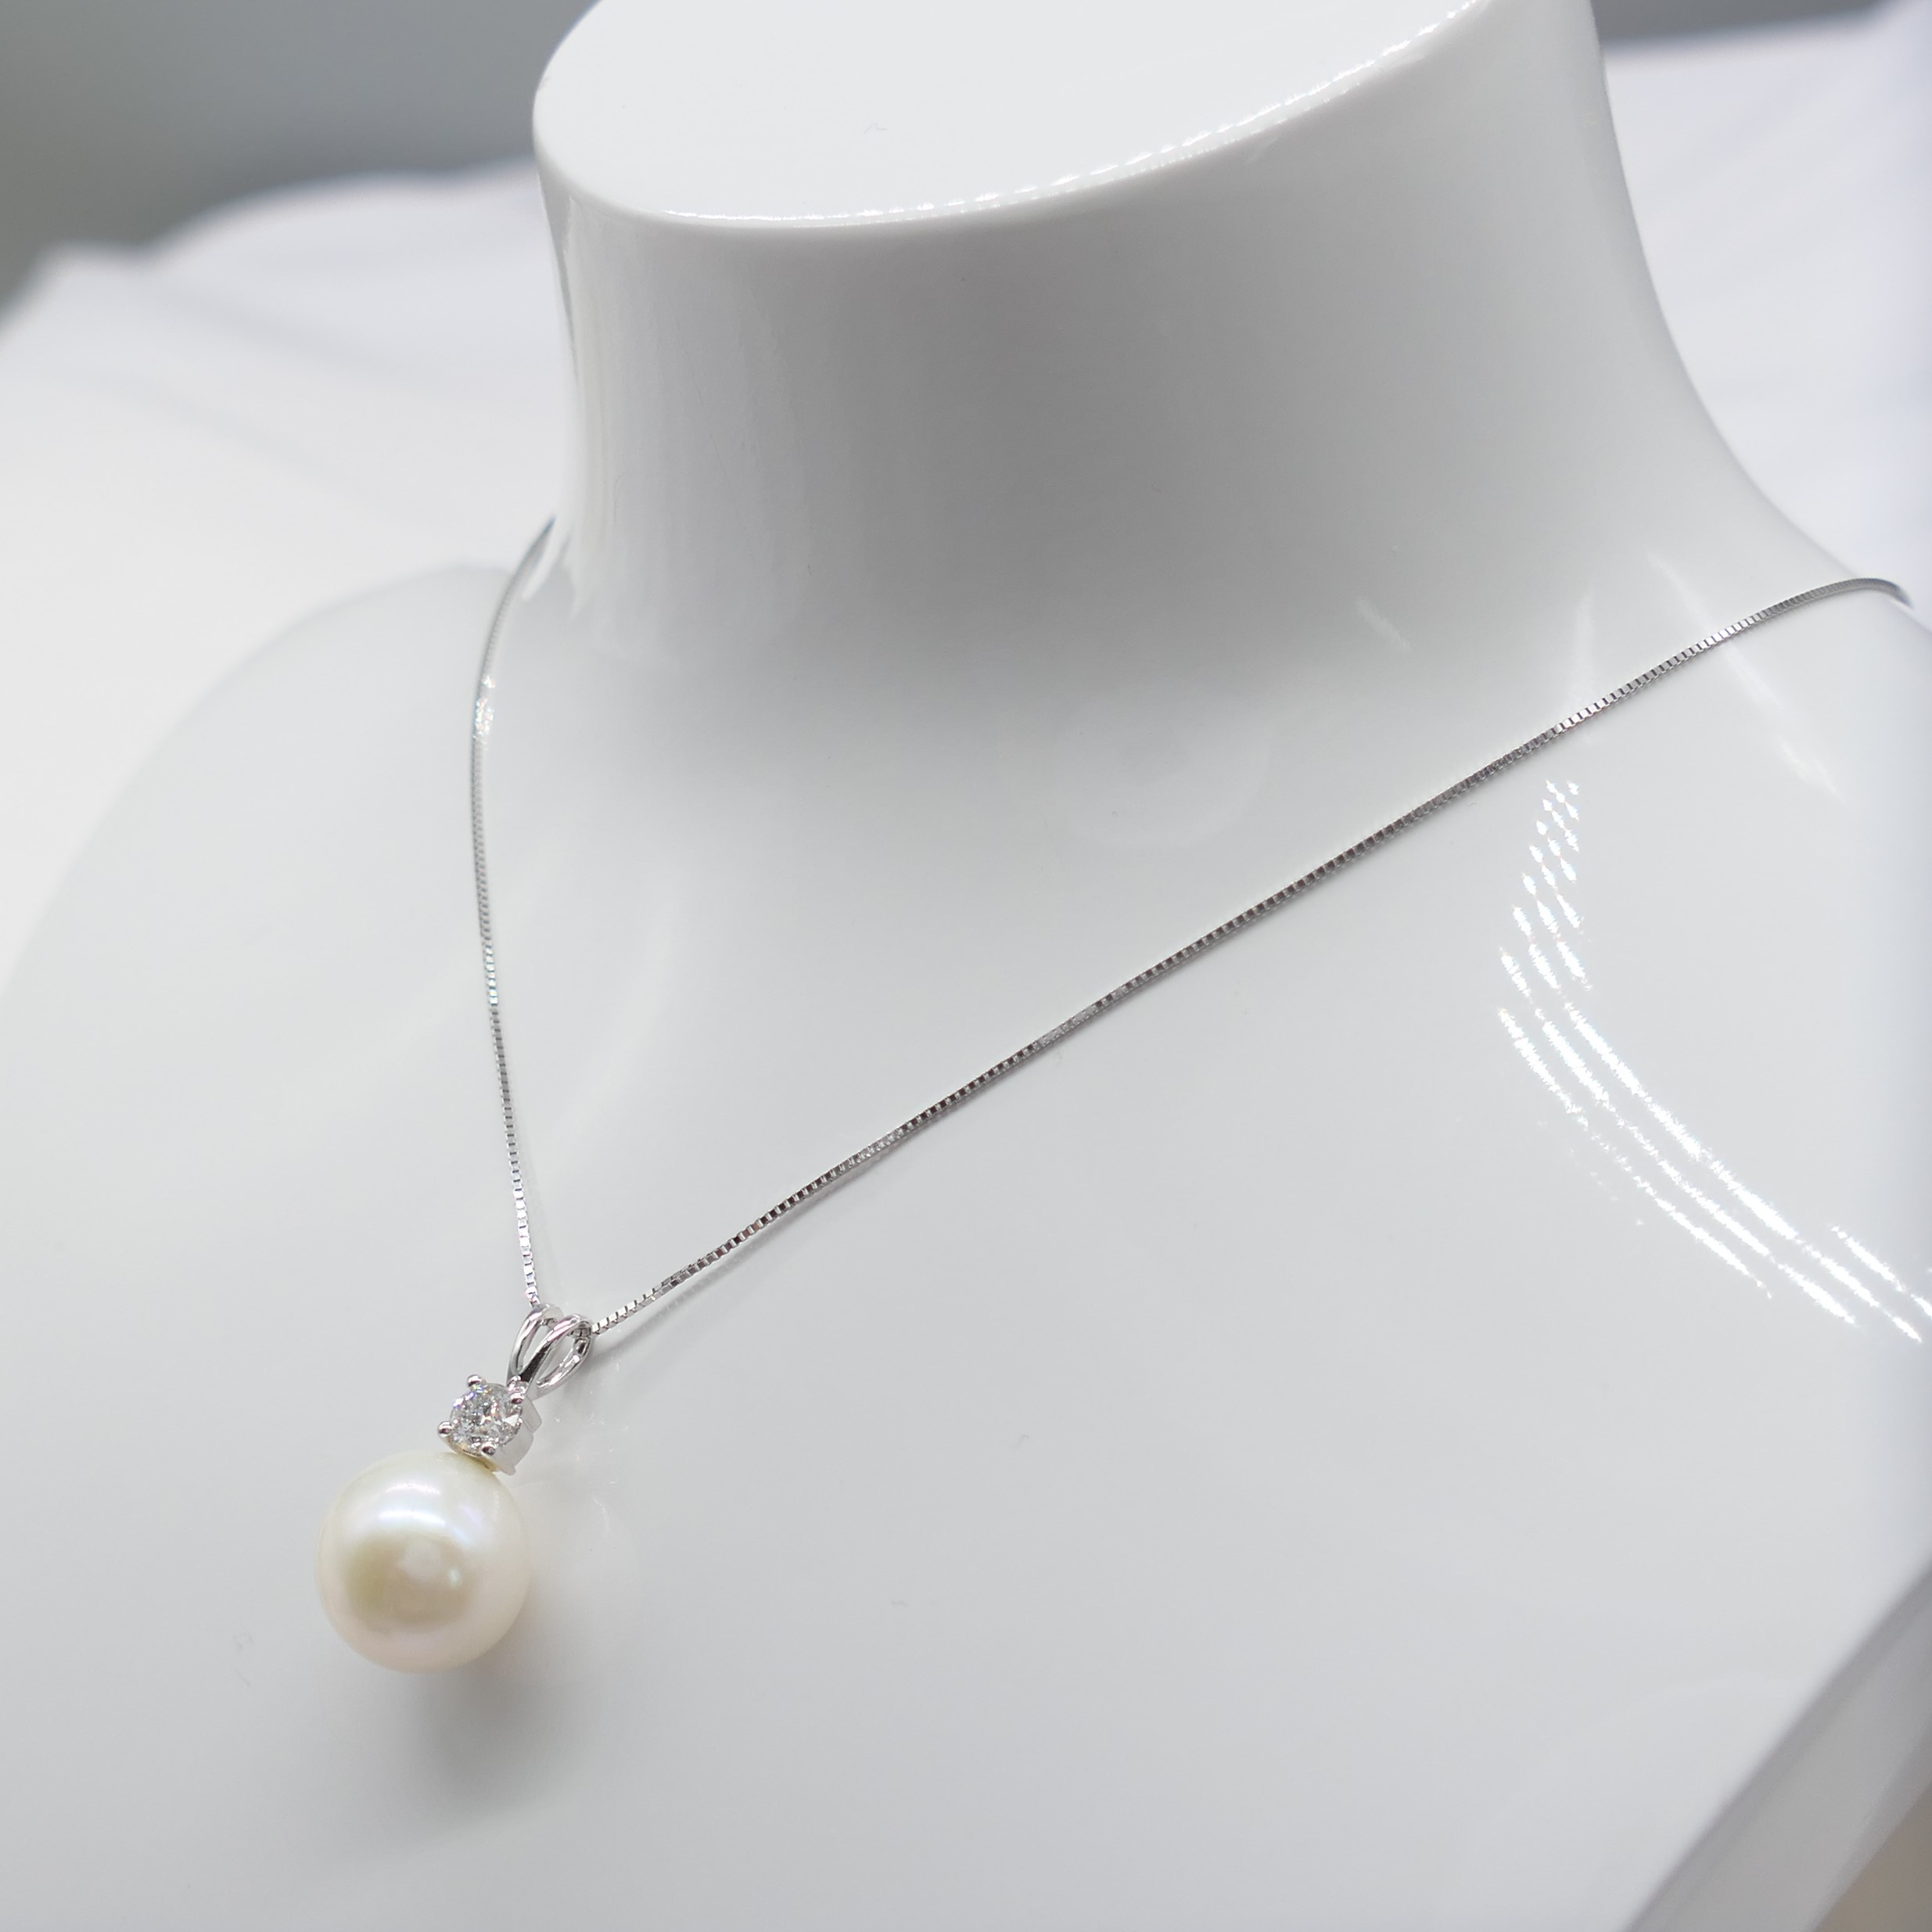 White Gold Freshwater Pearl and Diamond Necklace - Image 5 of 6